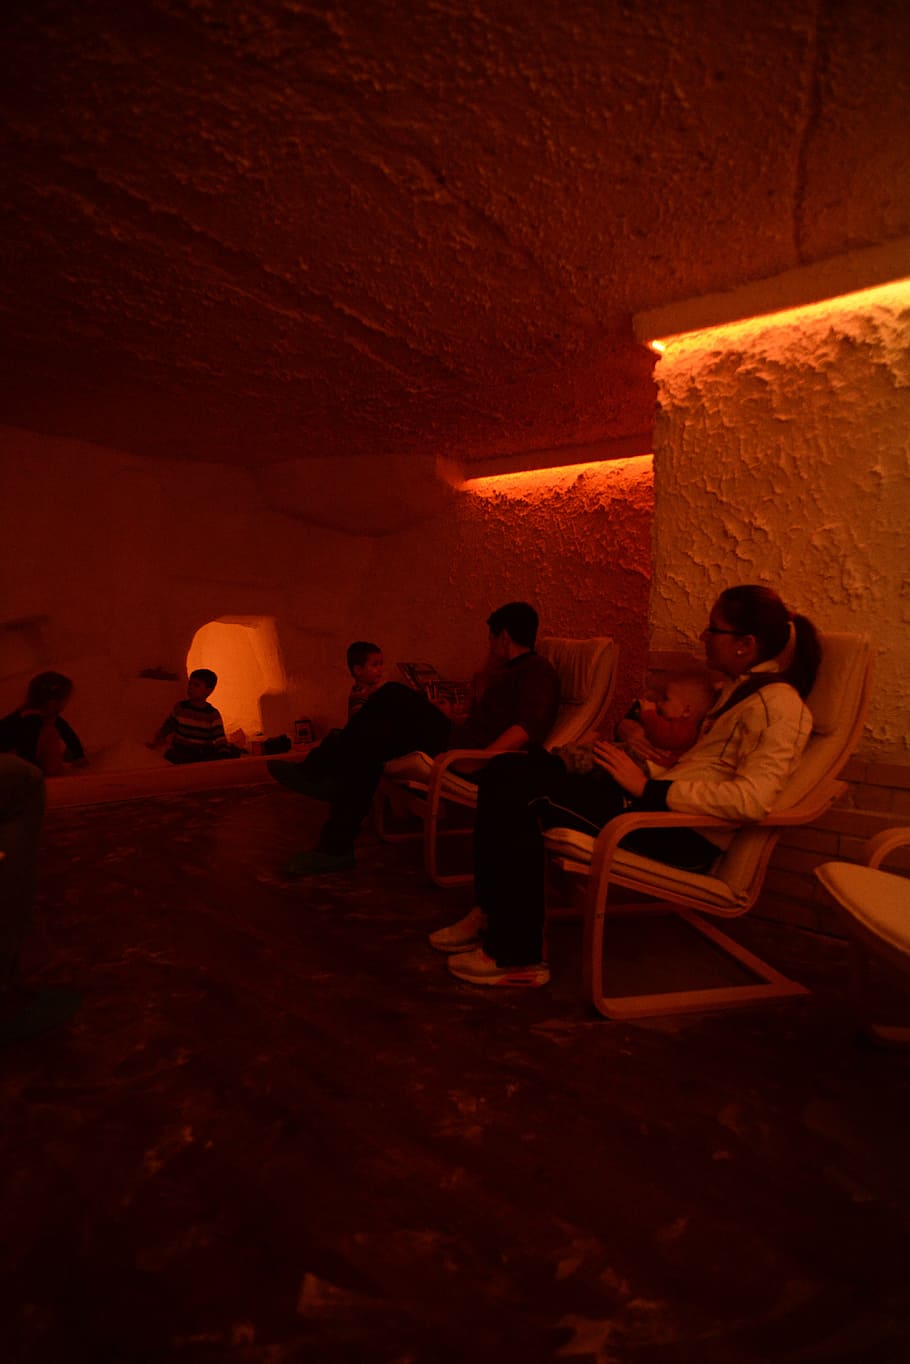 color therapy, salt cave, huntington beach, common cold, allergy, asthma, ralexáció, orange, group of people, real people